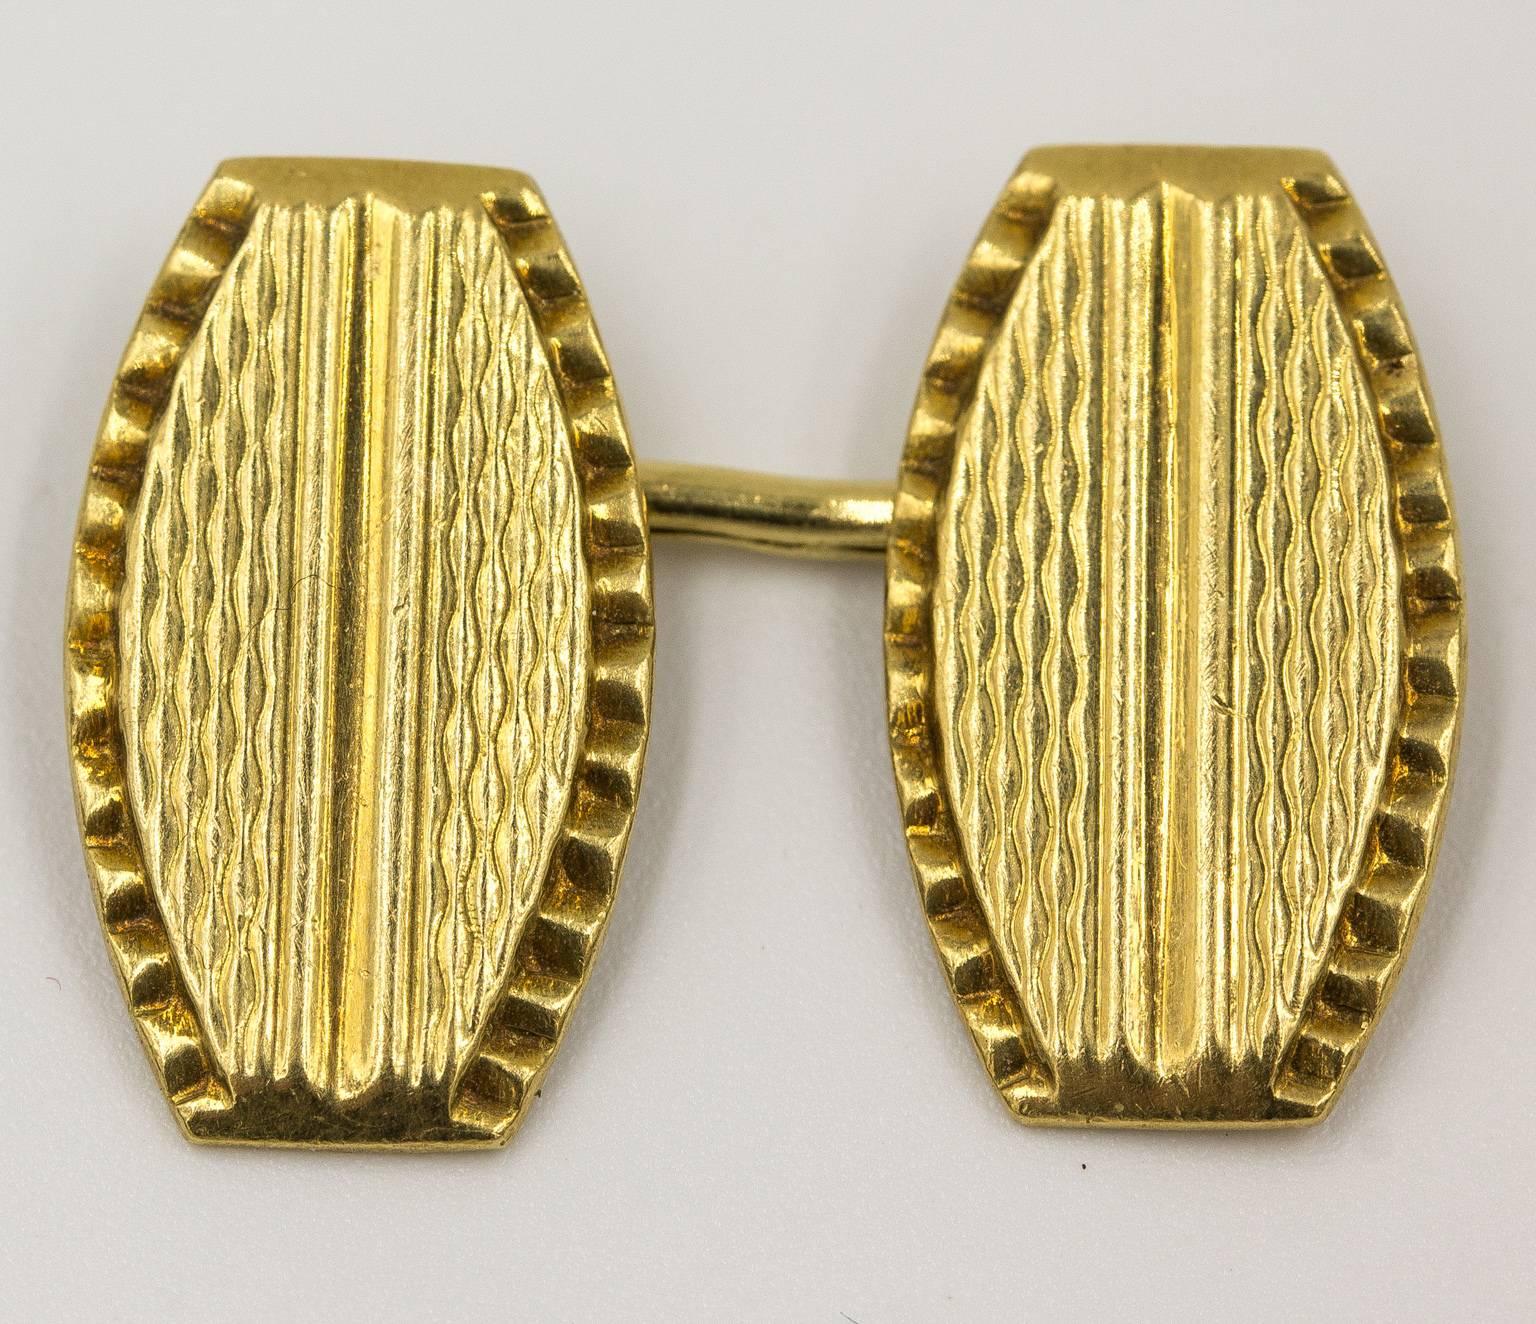 Vintage cuff links made from solid 18 KT yellow gold. Marked 750 for gold content. Lovely guilloche patterns on top. Double sided. Connected with links. Easy to wear. Weighs 10 grams total.